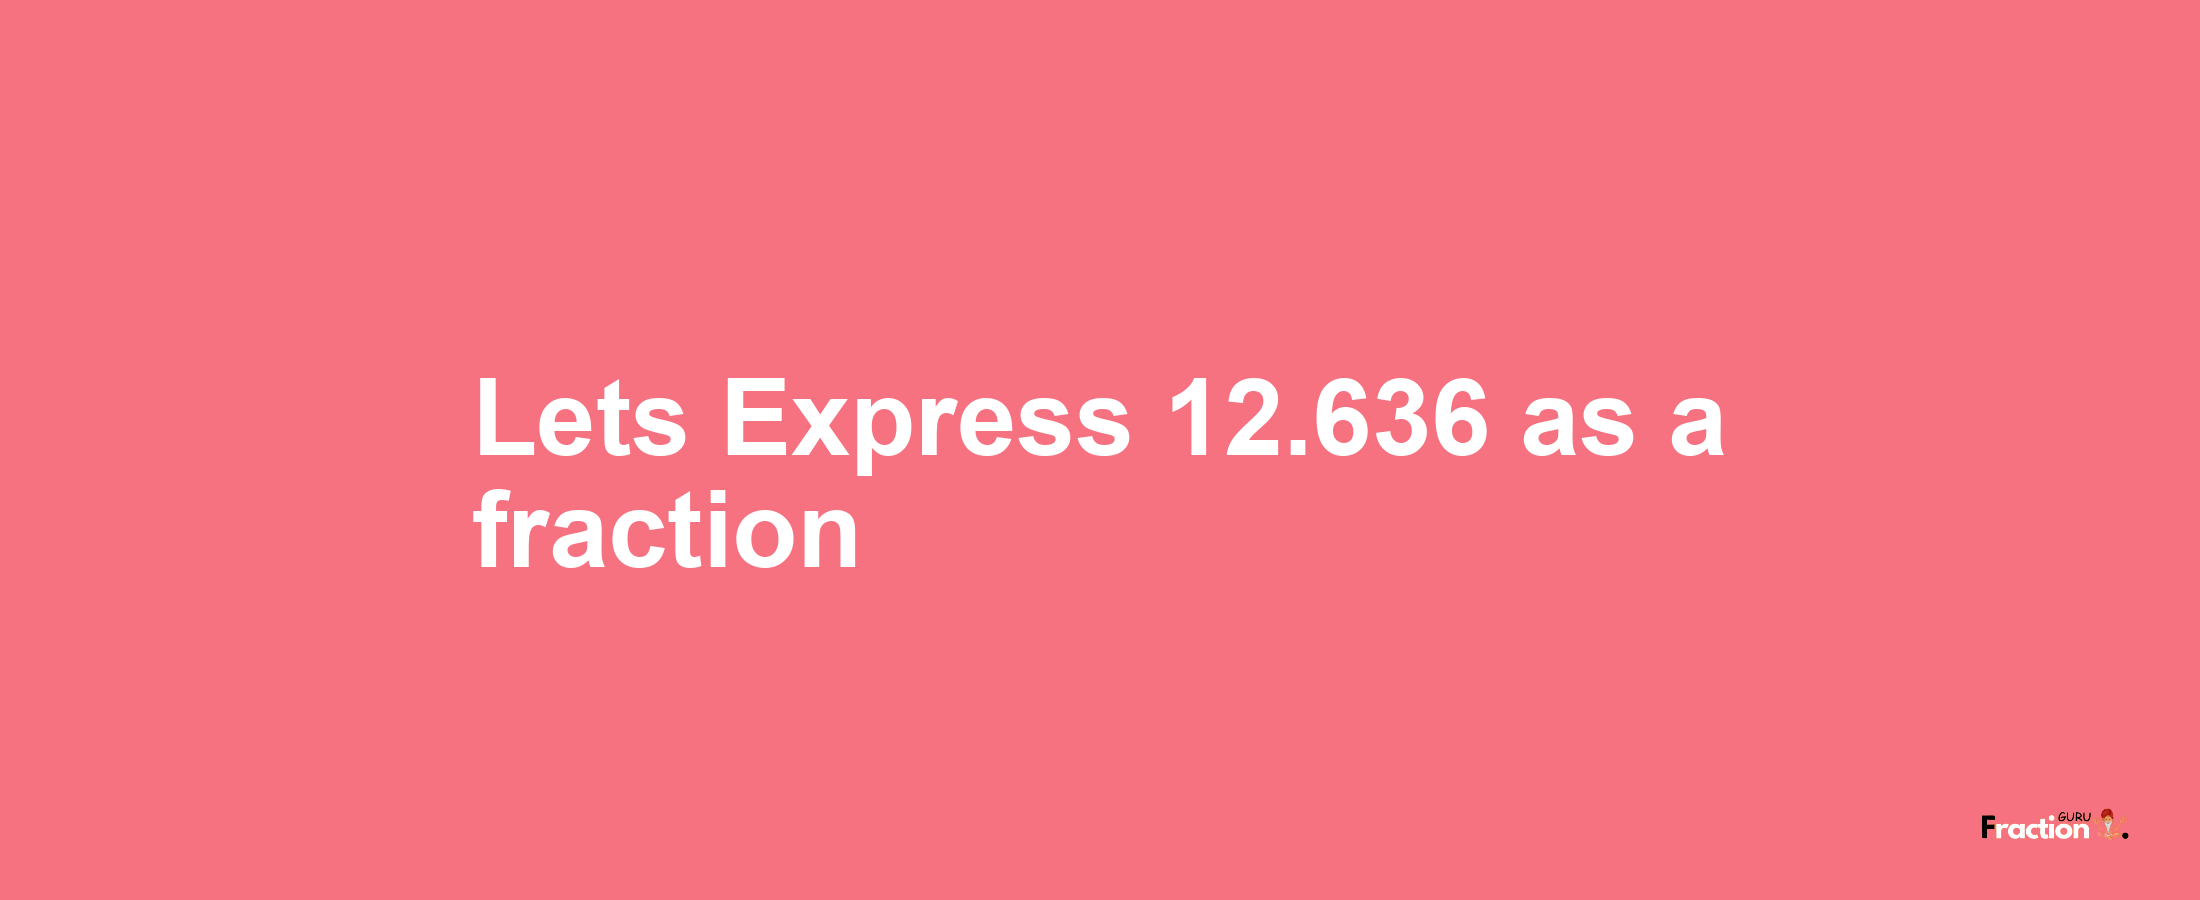 Lets Express 12.636 as afraction